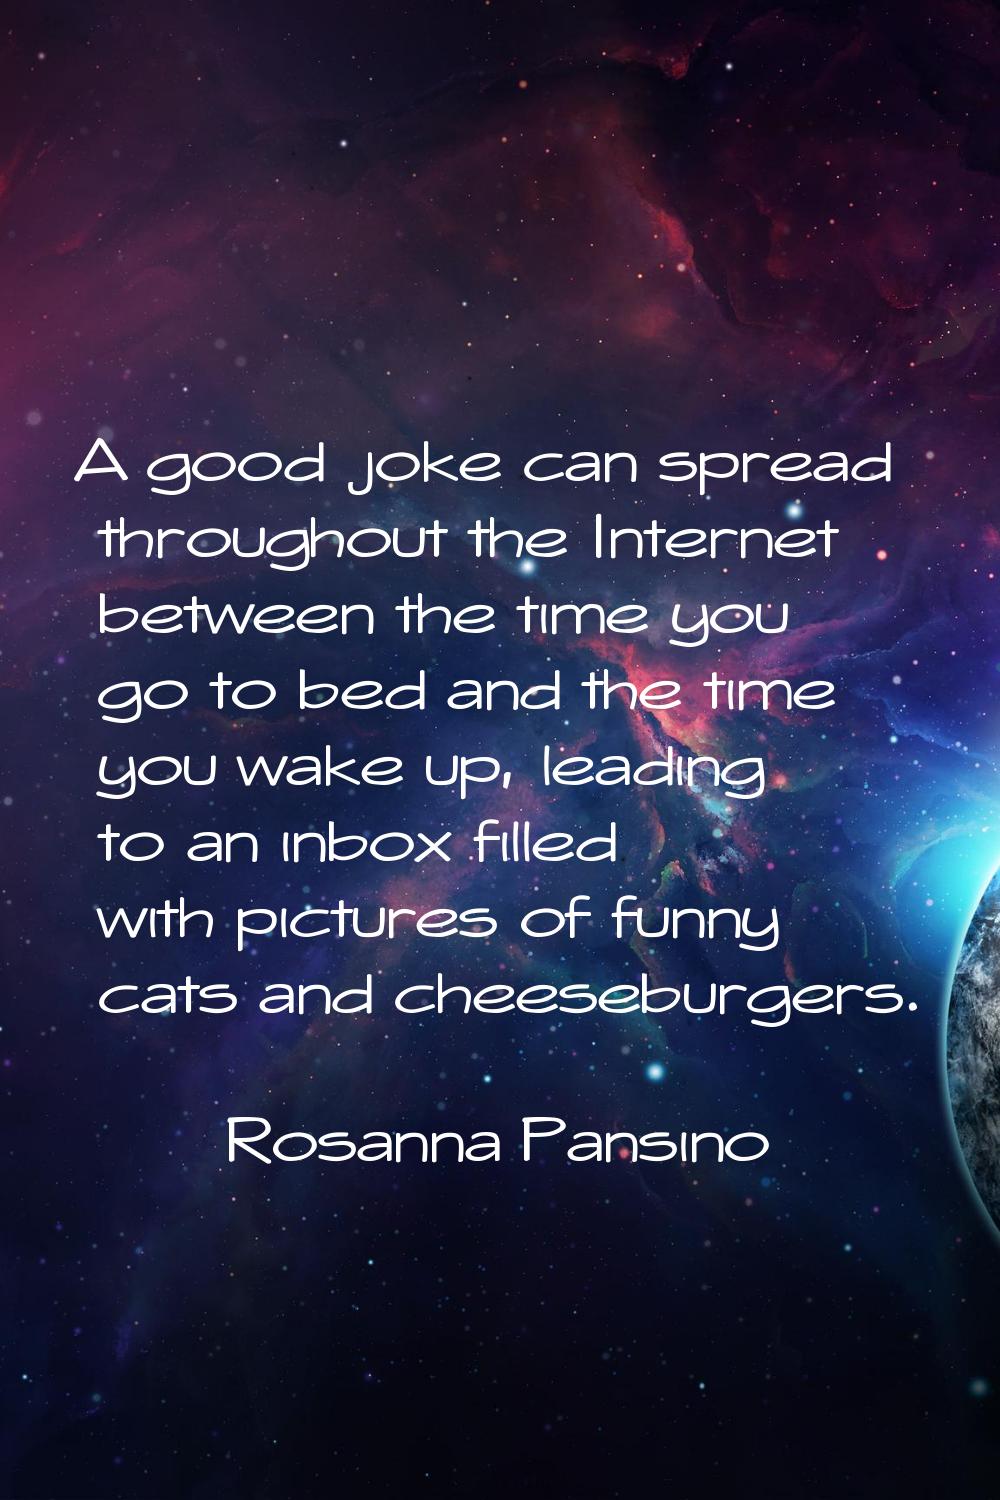 A good joke can spread throughout the Internet between the time you go to bed and the time you wake